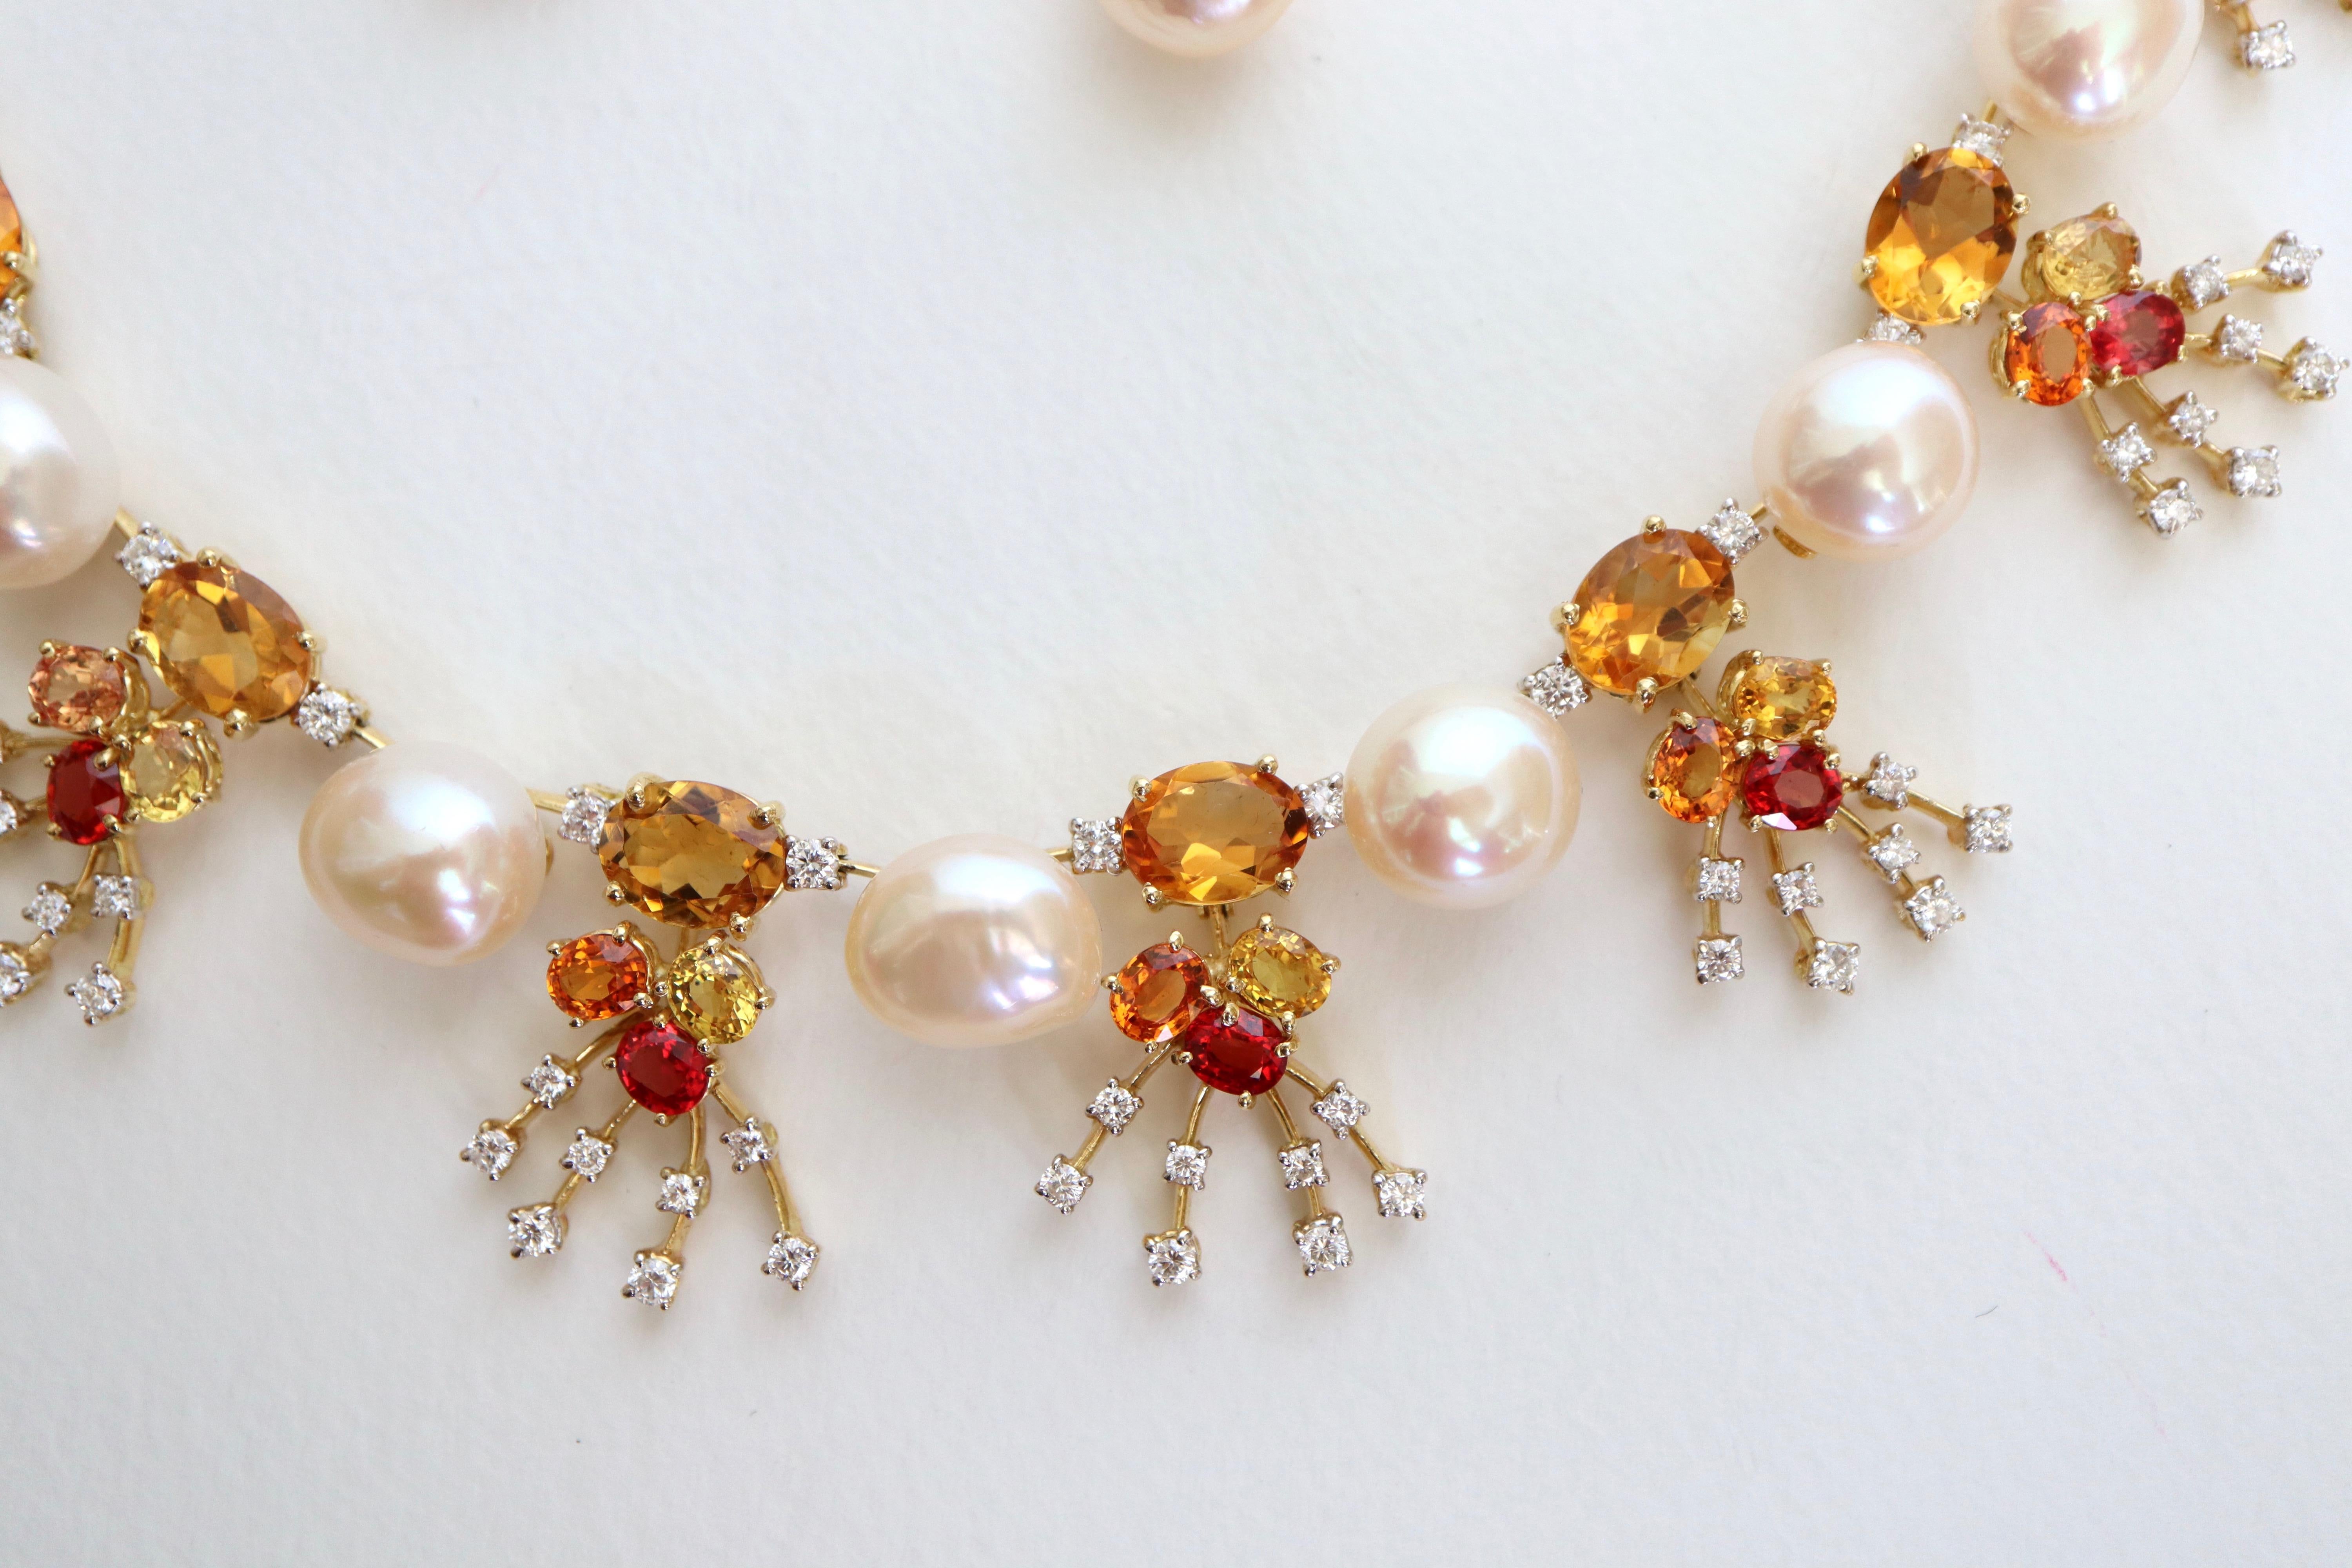 HASBANI Set in 18 Carat yellow Gold, Baroque Pearls, Diamonds, precious Stones (Yellow Sapphires, Orange and Cognac) and semi-precious Stones (Citrines):

THE NECKLACE is composed of 9 Motifs, representing a Sheaf, adorned with a Citrine of 9x7 mm,